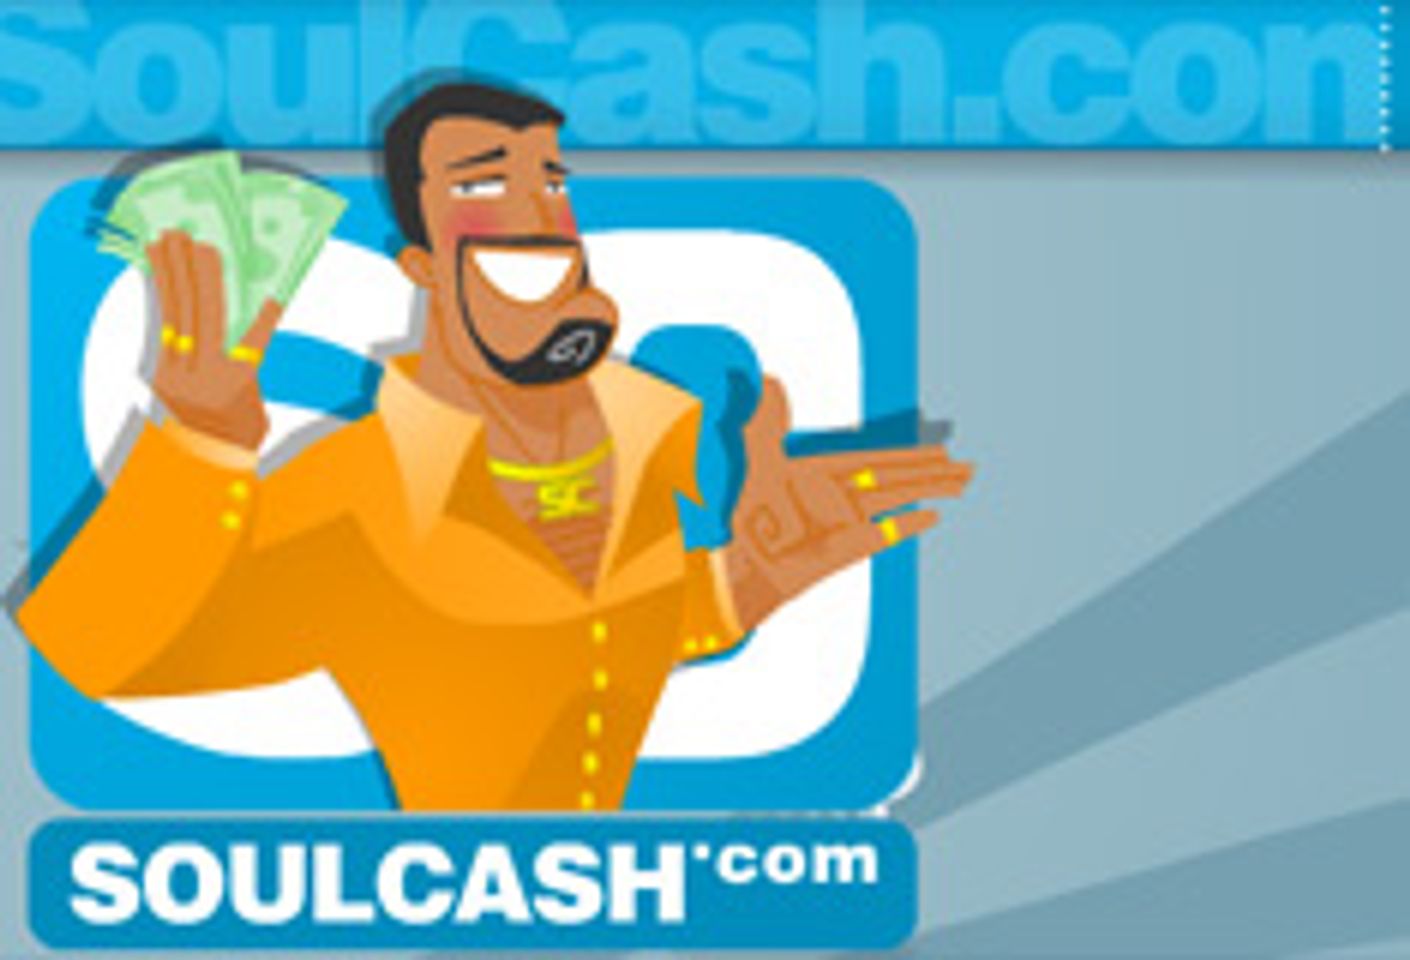 OhMobile Gets Some Soul &#8230; Cash